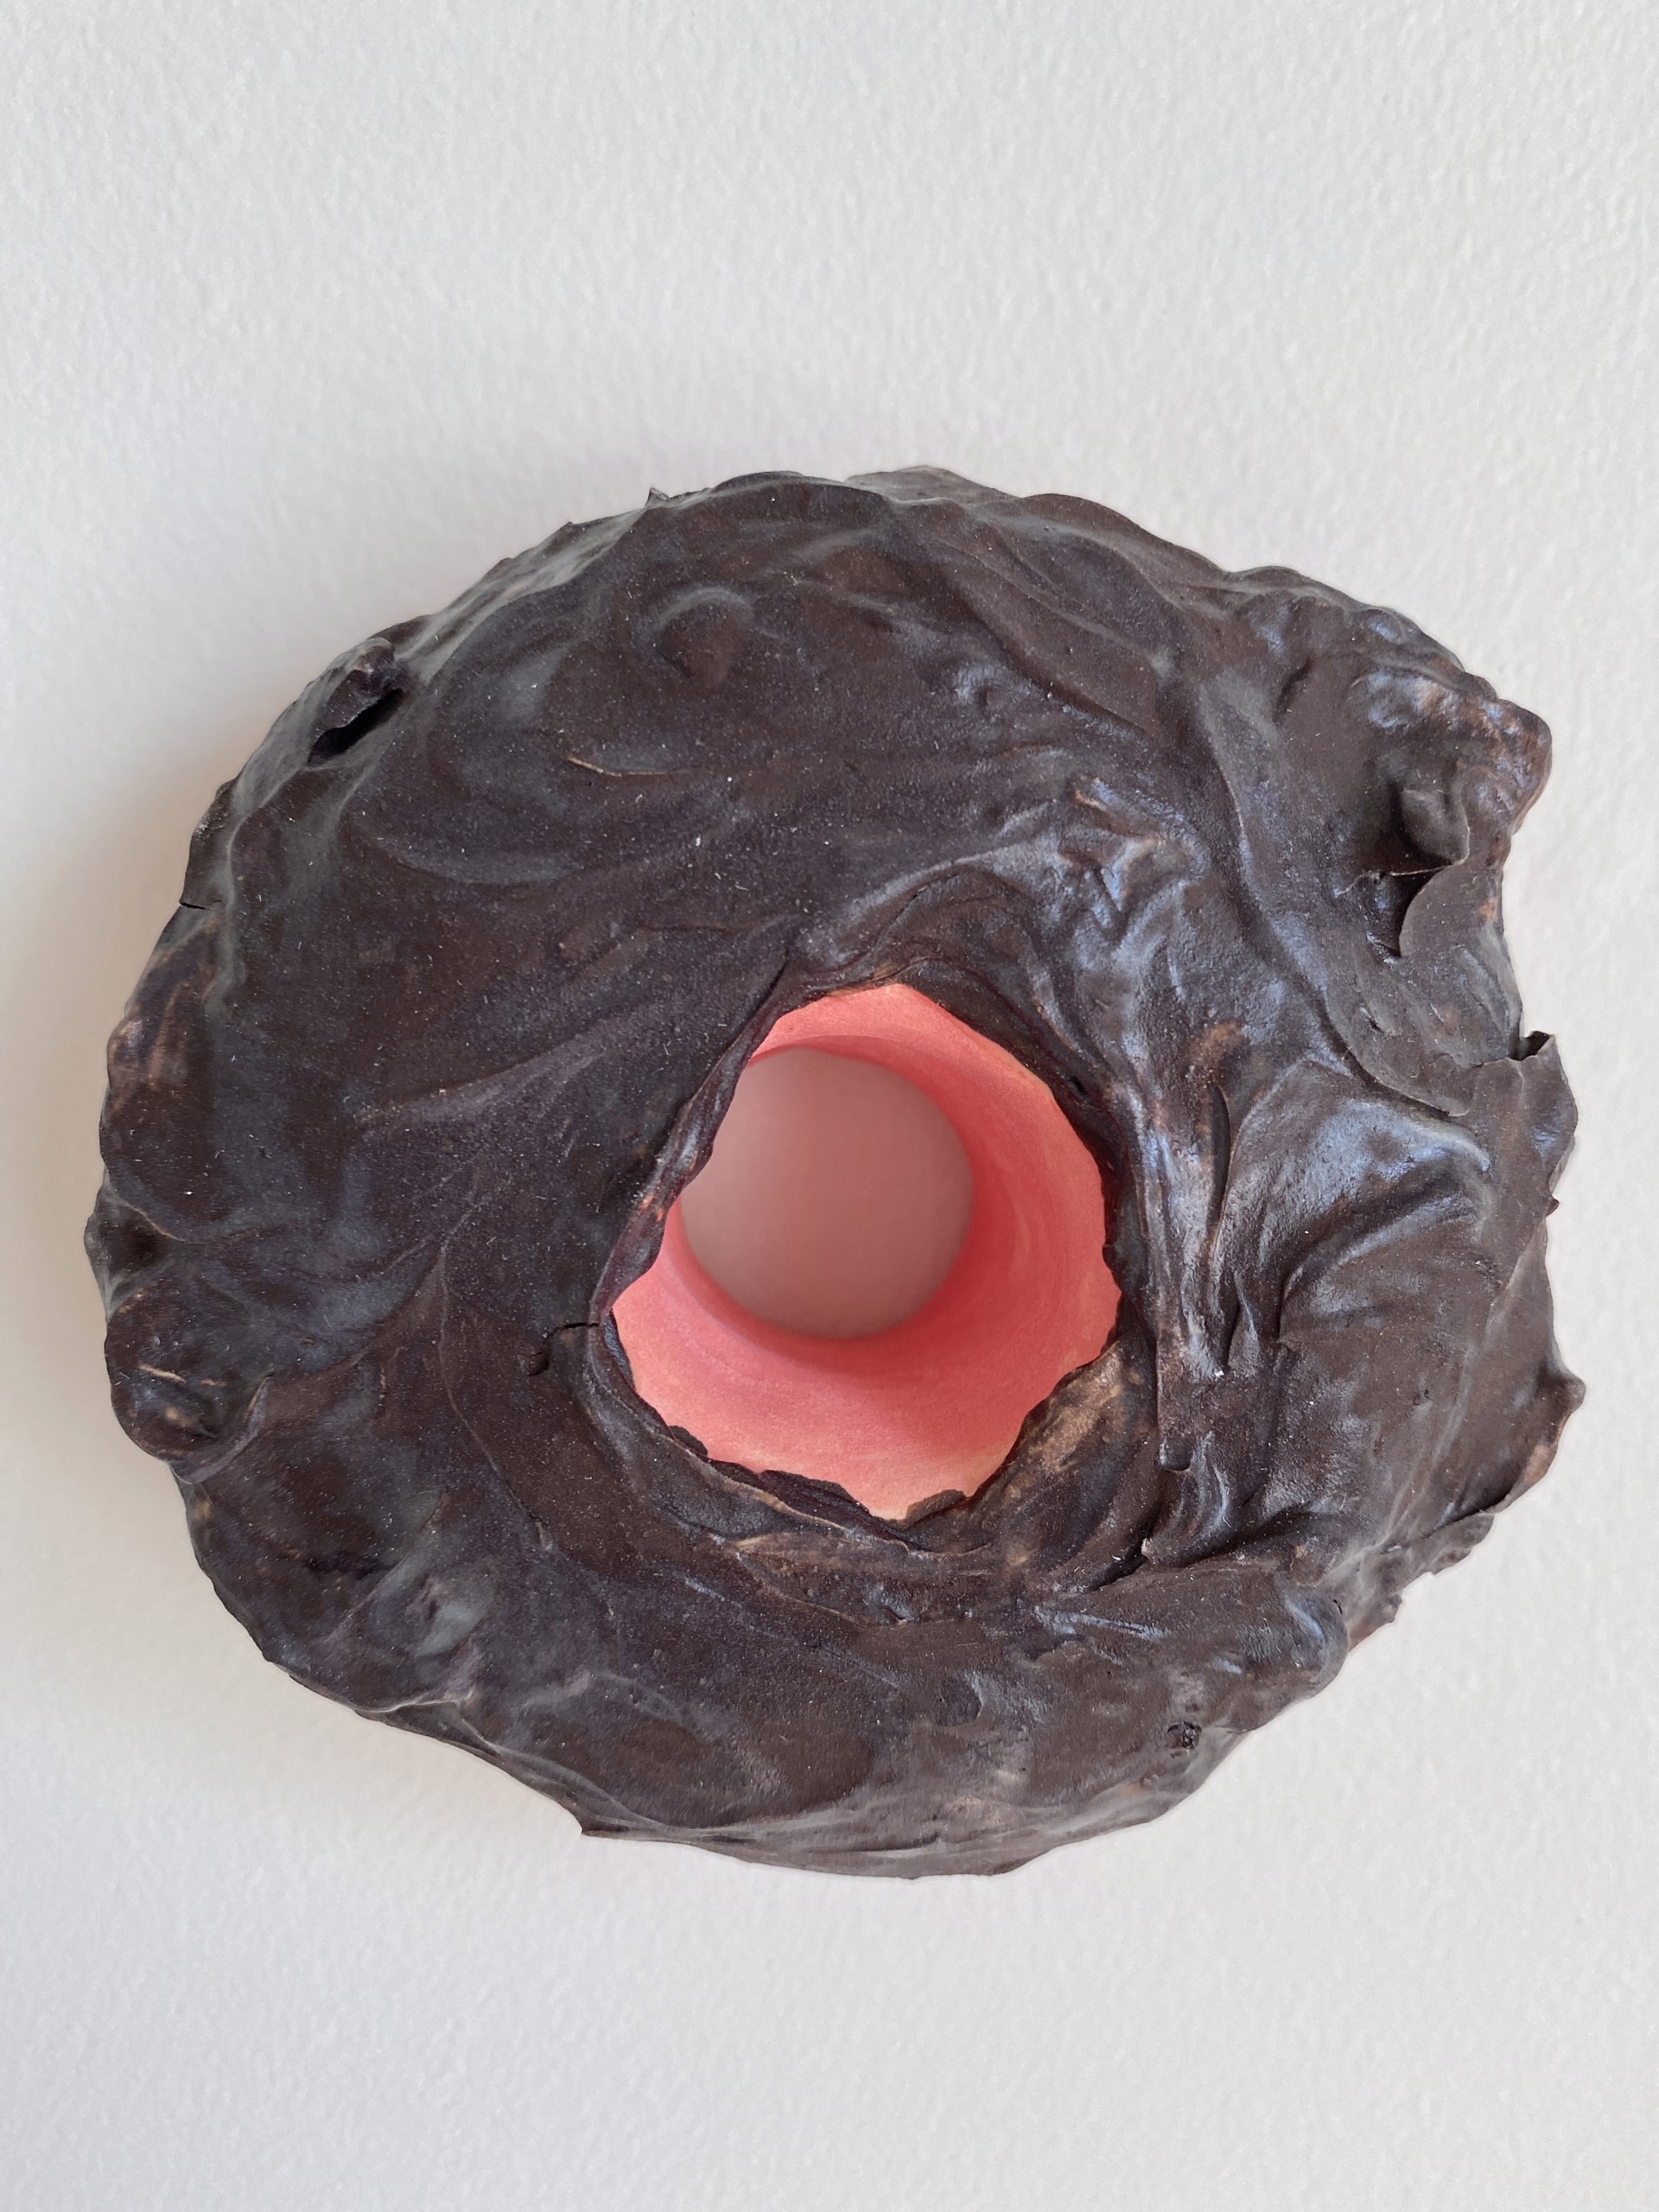 Strawberry Donut With Chocolate Frosting by Liv Antonecchia